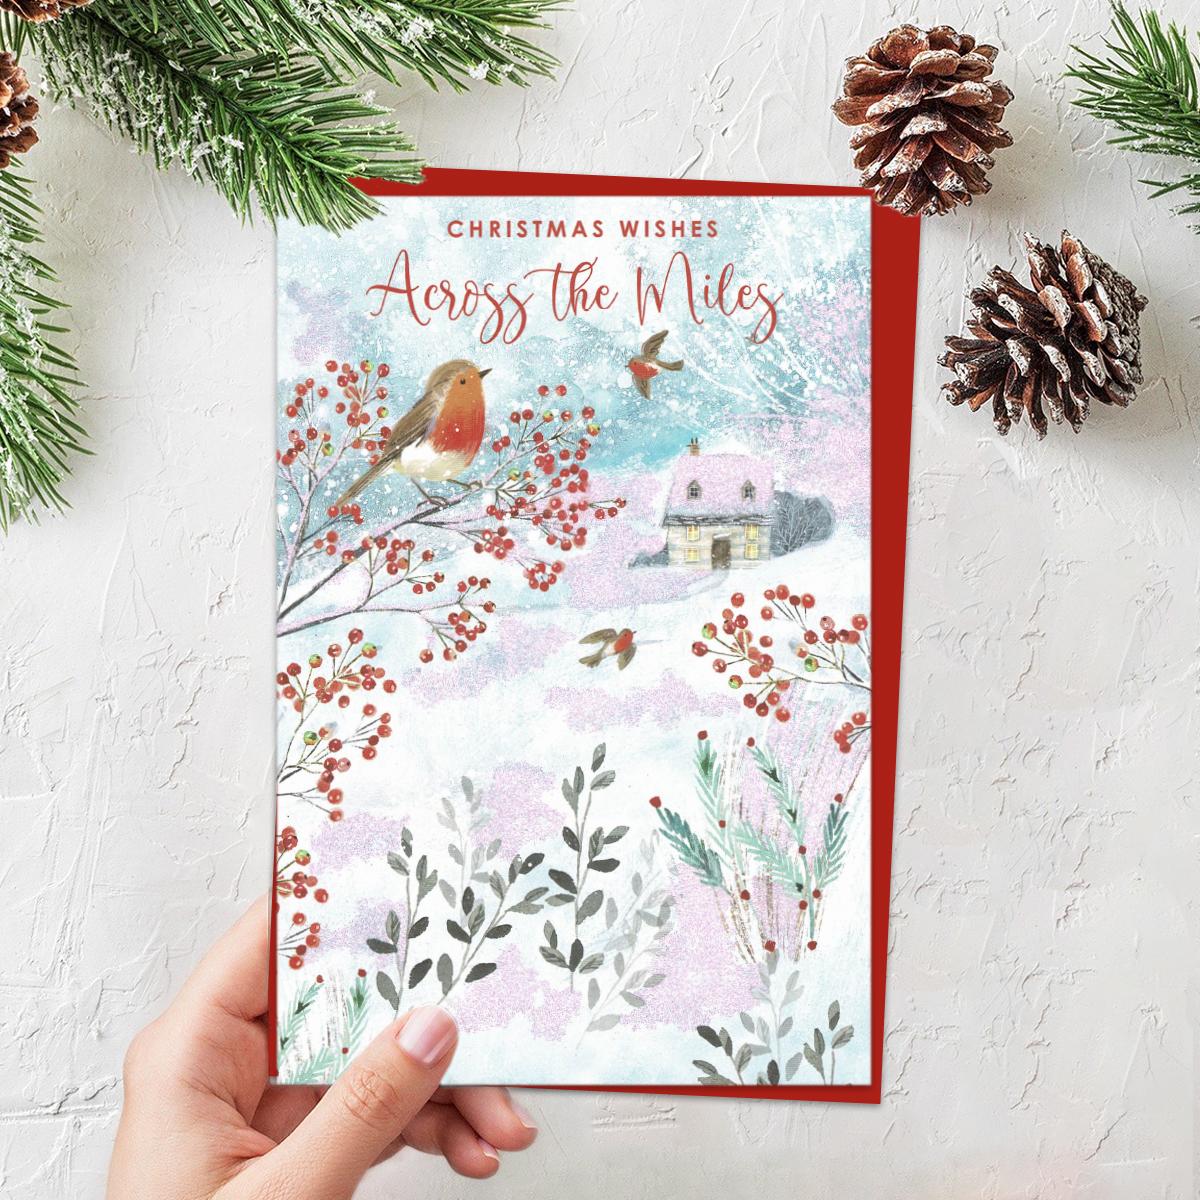 Christmas Wishes Across the Miles Featuring Robins In A Snowy Scene. Finished With Red Lettering, Sparkle And Red Envelope